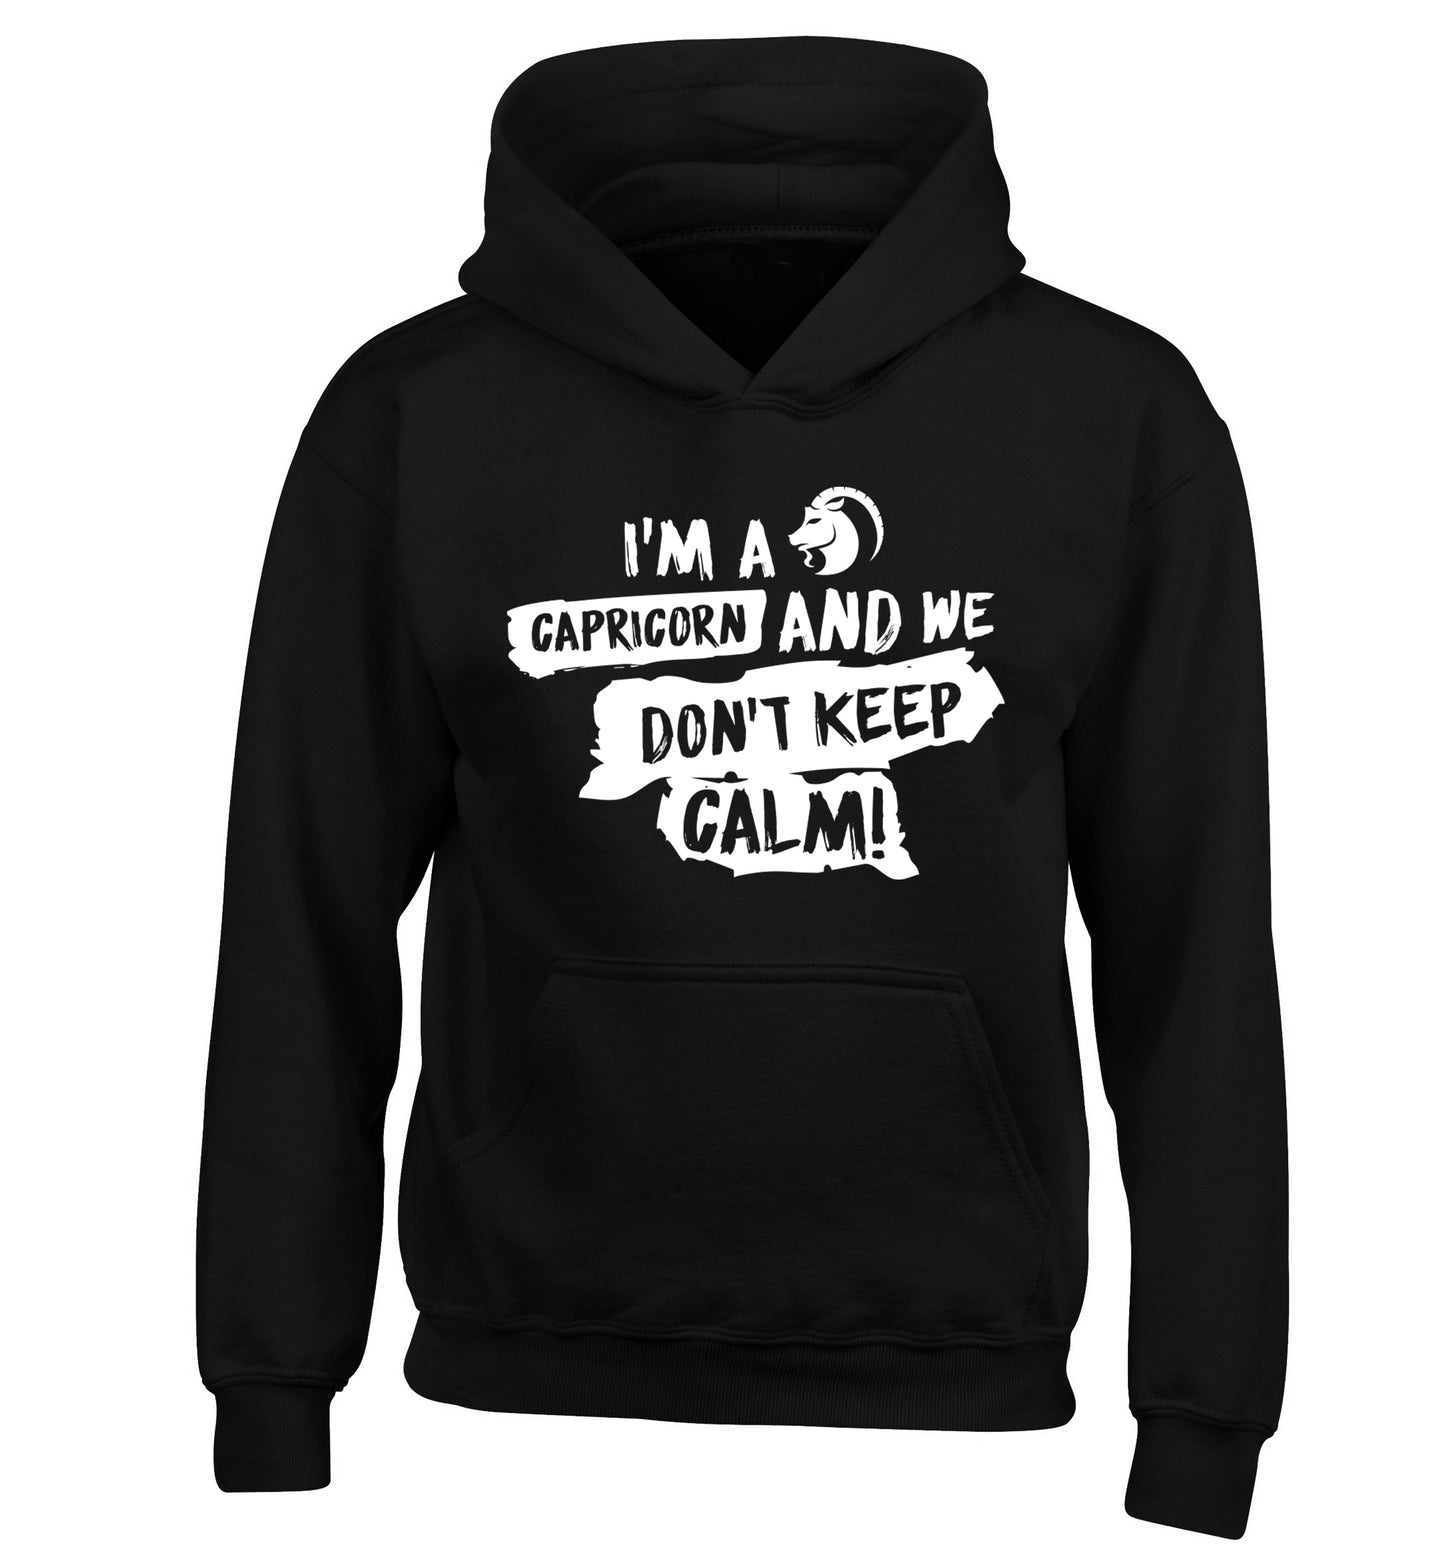 I'm a capricorn and we don't keep calm children's black hoodie 12-13 Years